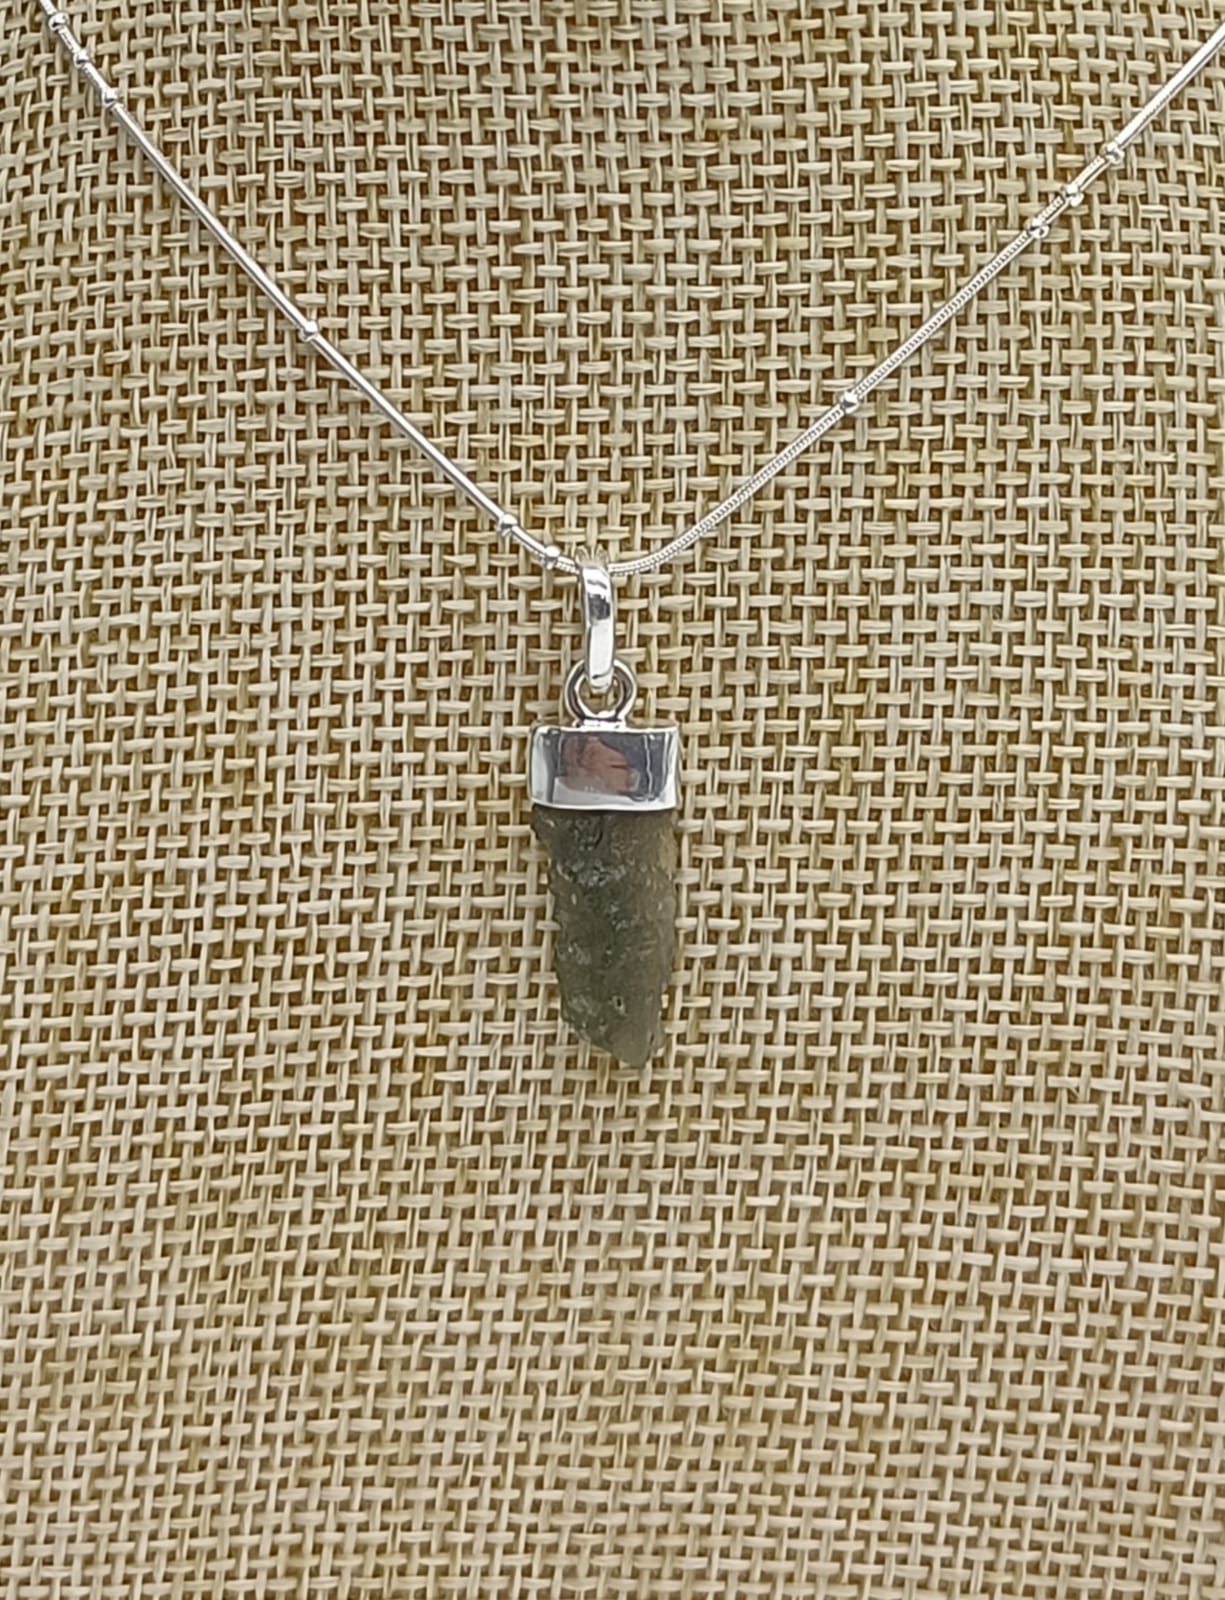 1.4g Authentic Moldavite 925 Silver Pendant 19x9mm (Silver Chain Included) Crystal Wellness